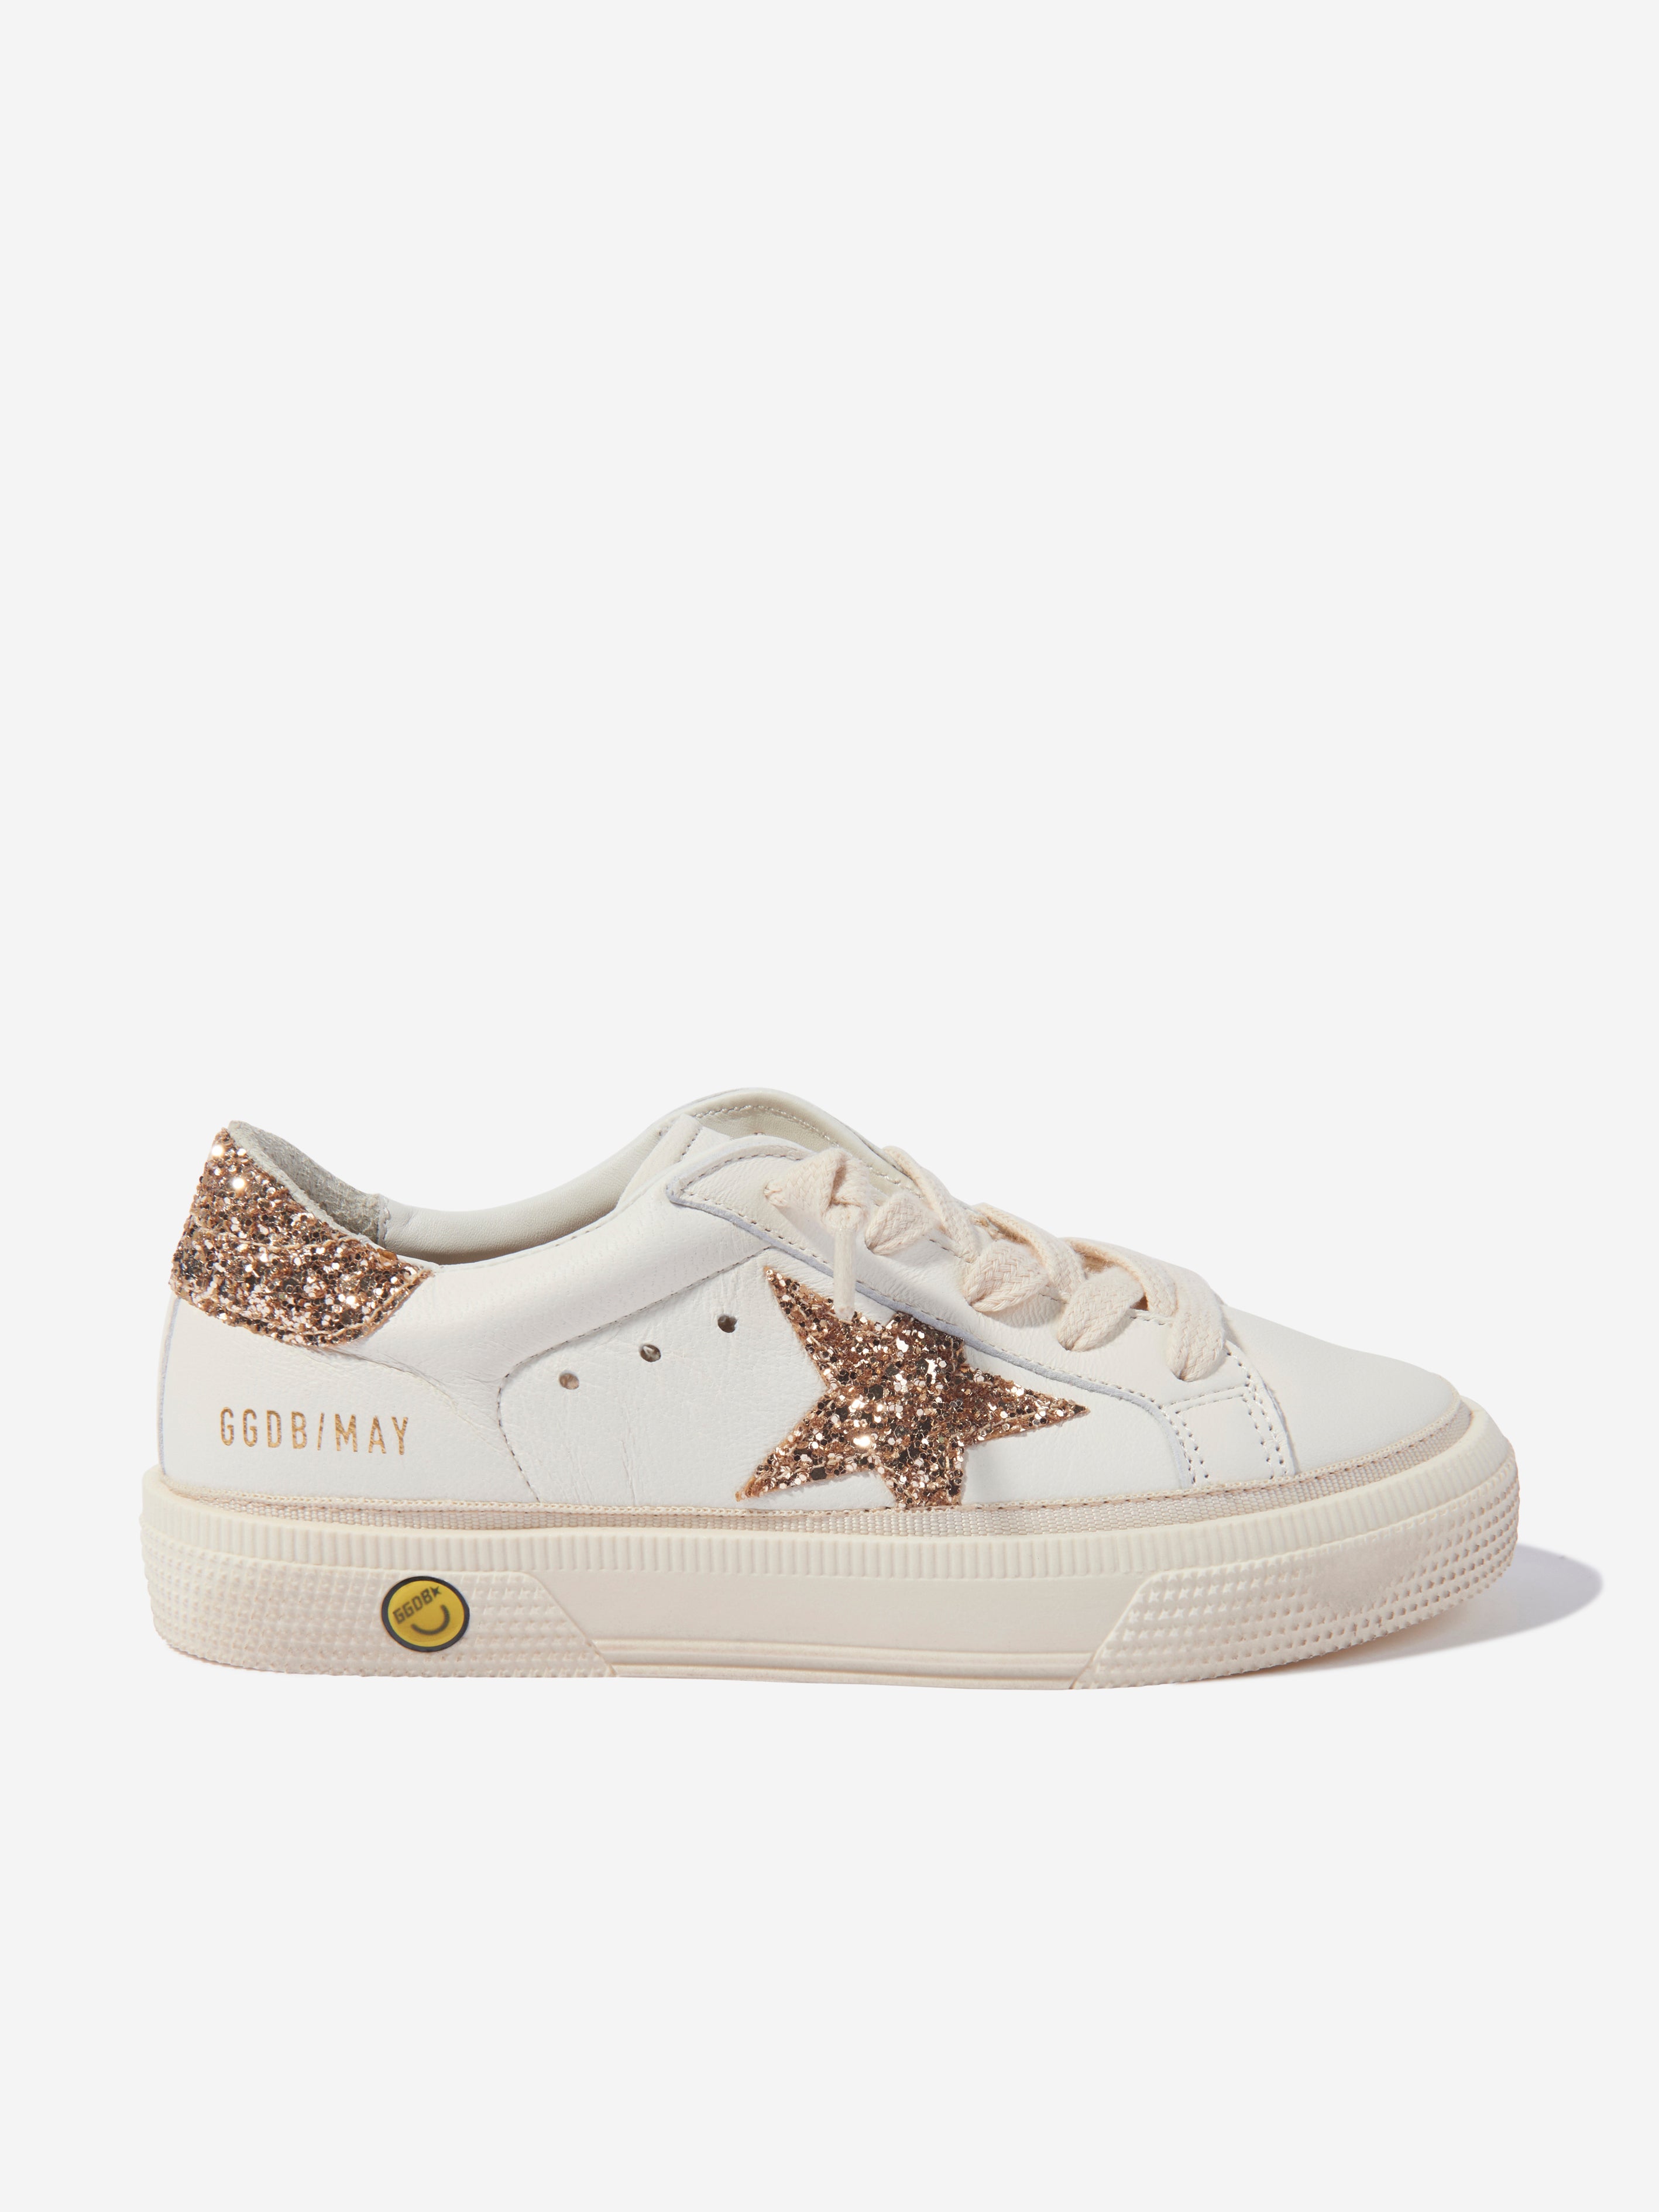 Girls Leather Glitter Star And Heel Trainers in White | Childsplay Clothing